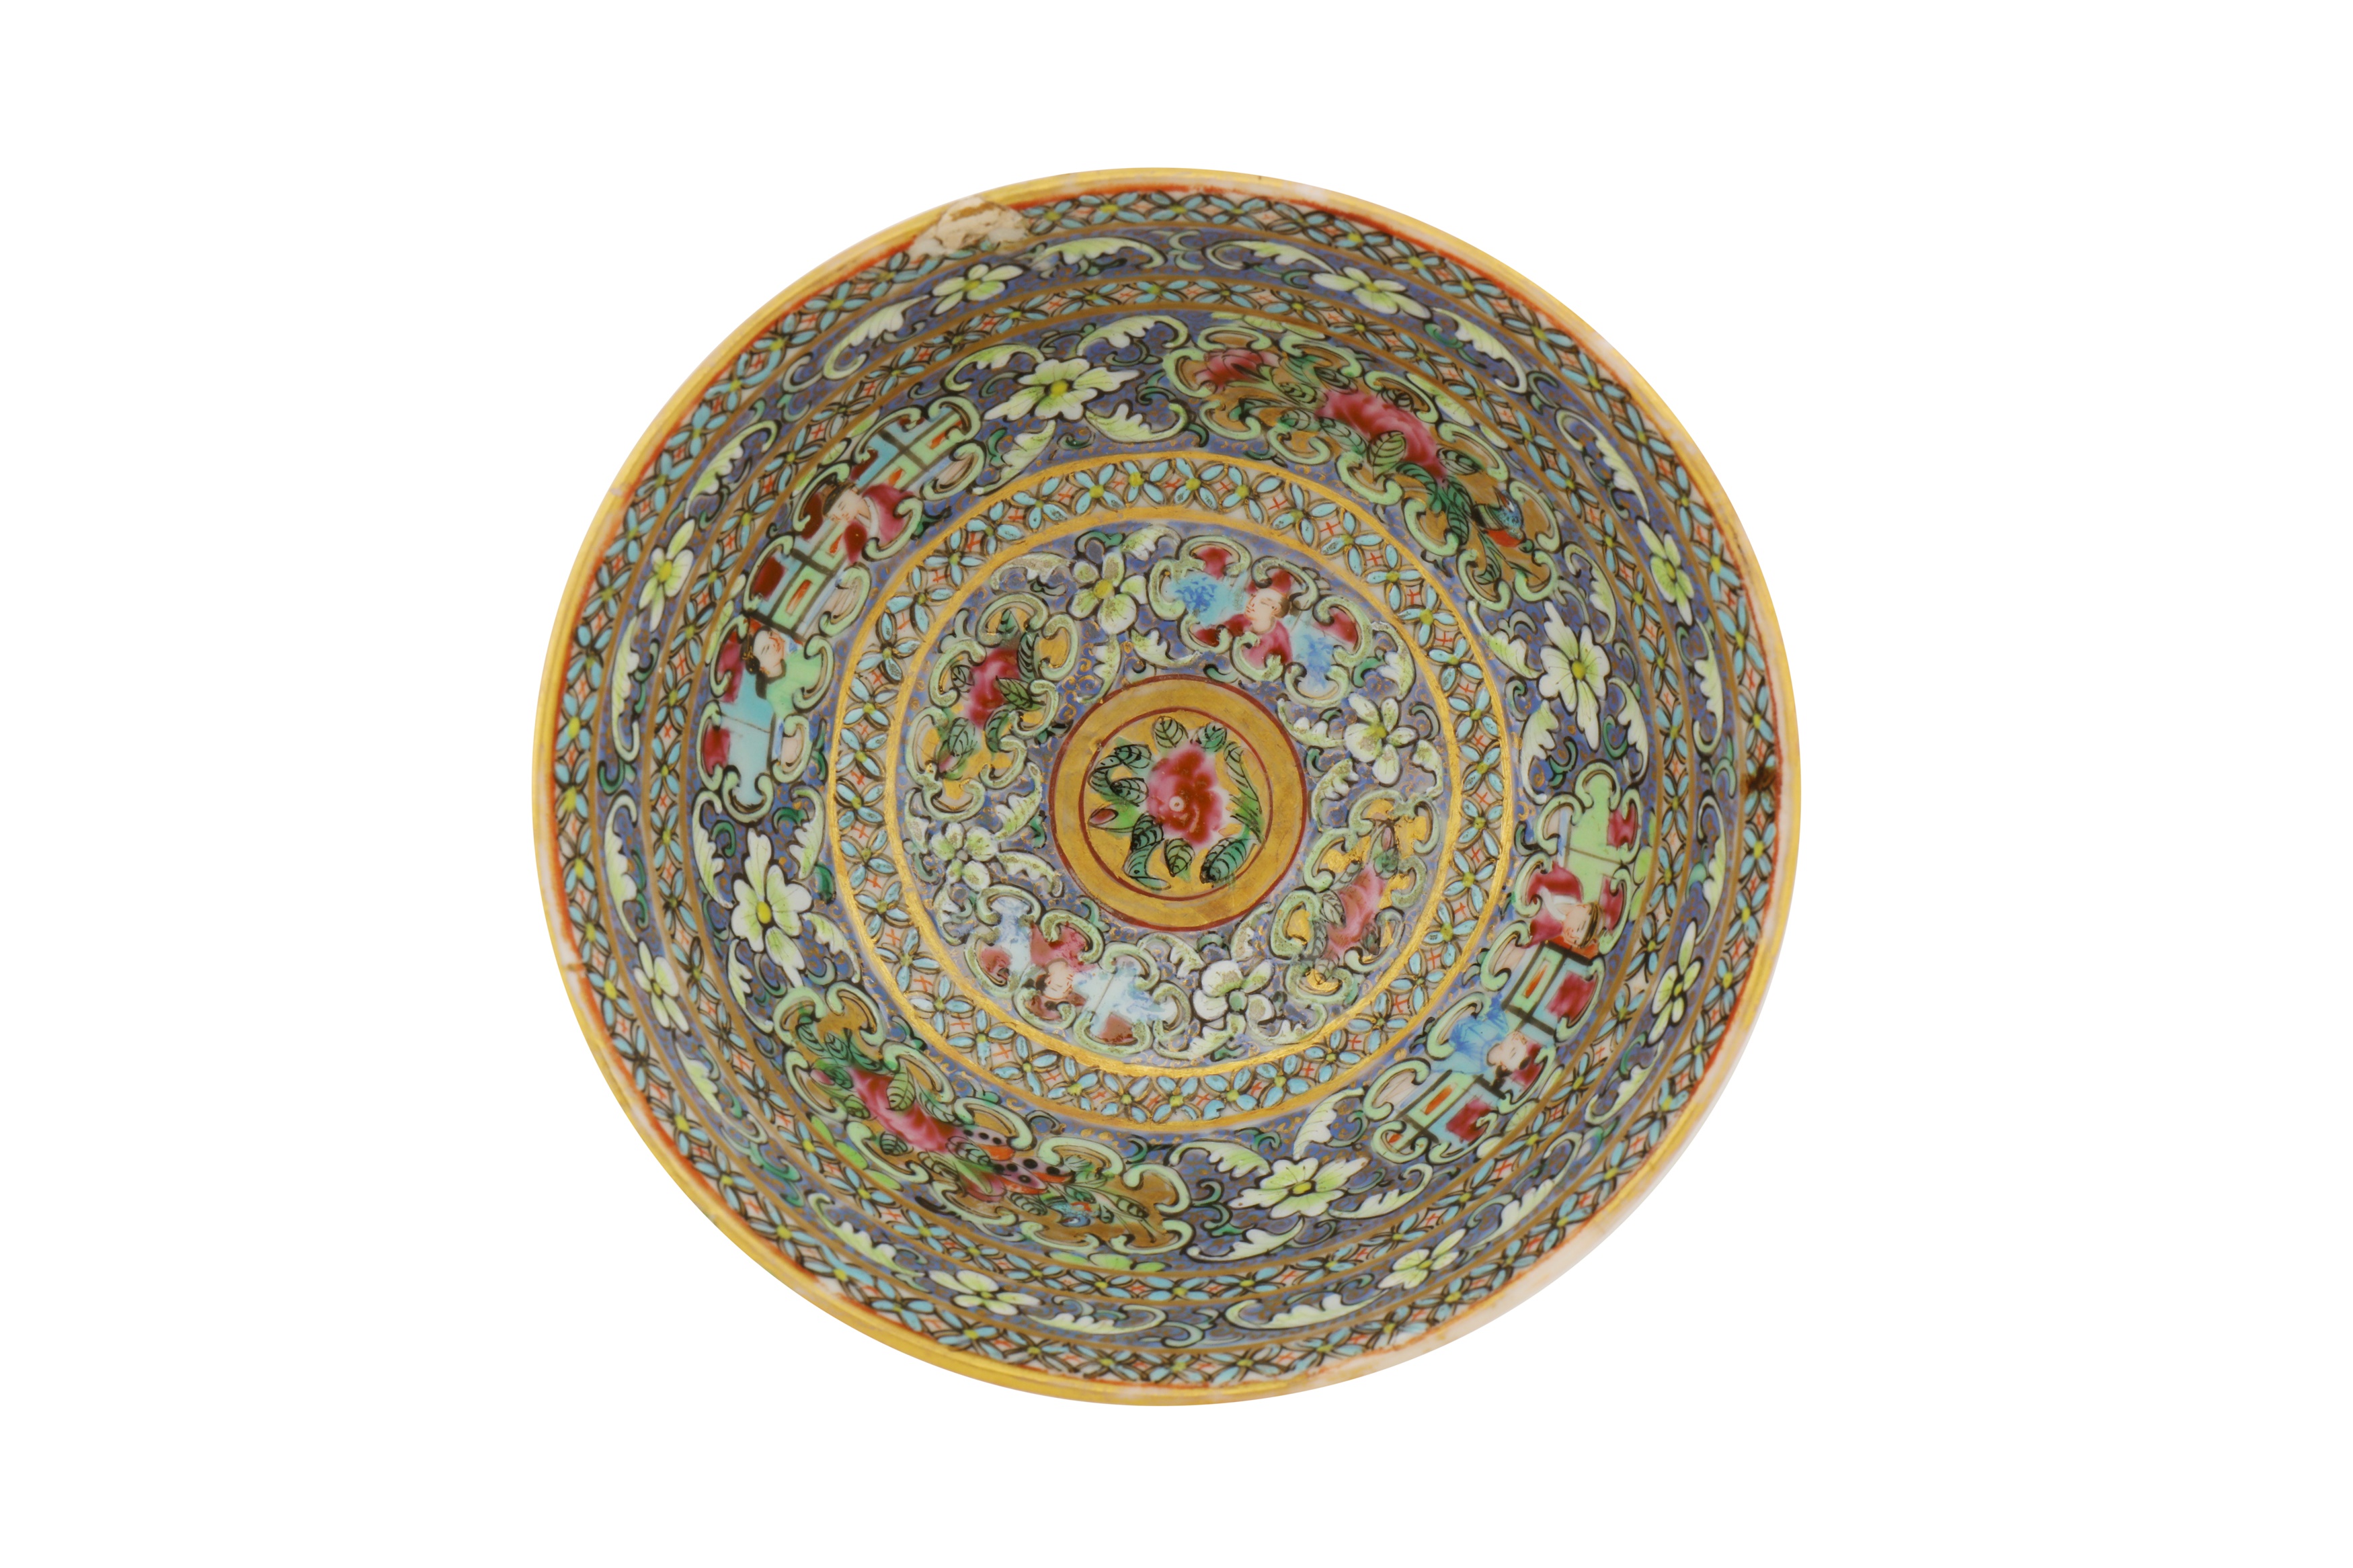 A MEDIUM-SIZED BOWL AND DISH AND SMALLER BOWL FROM THE ZILL AL-SULTAN CANTON PORCELAIN SERVICE - Image 10 of 17